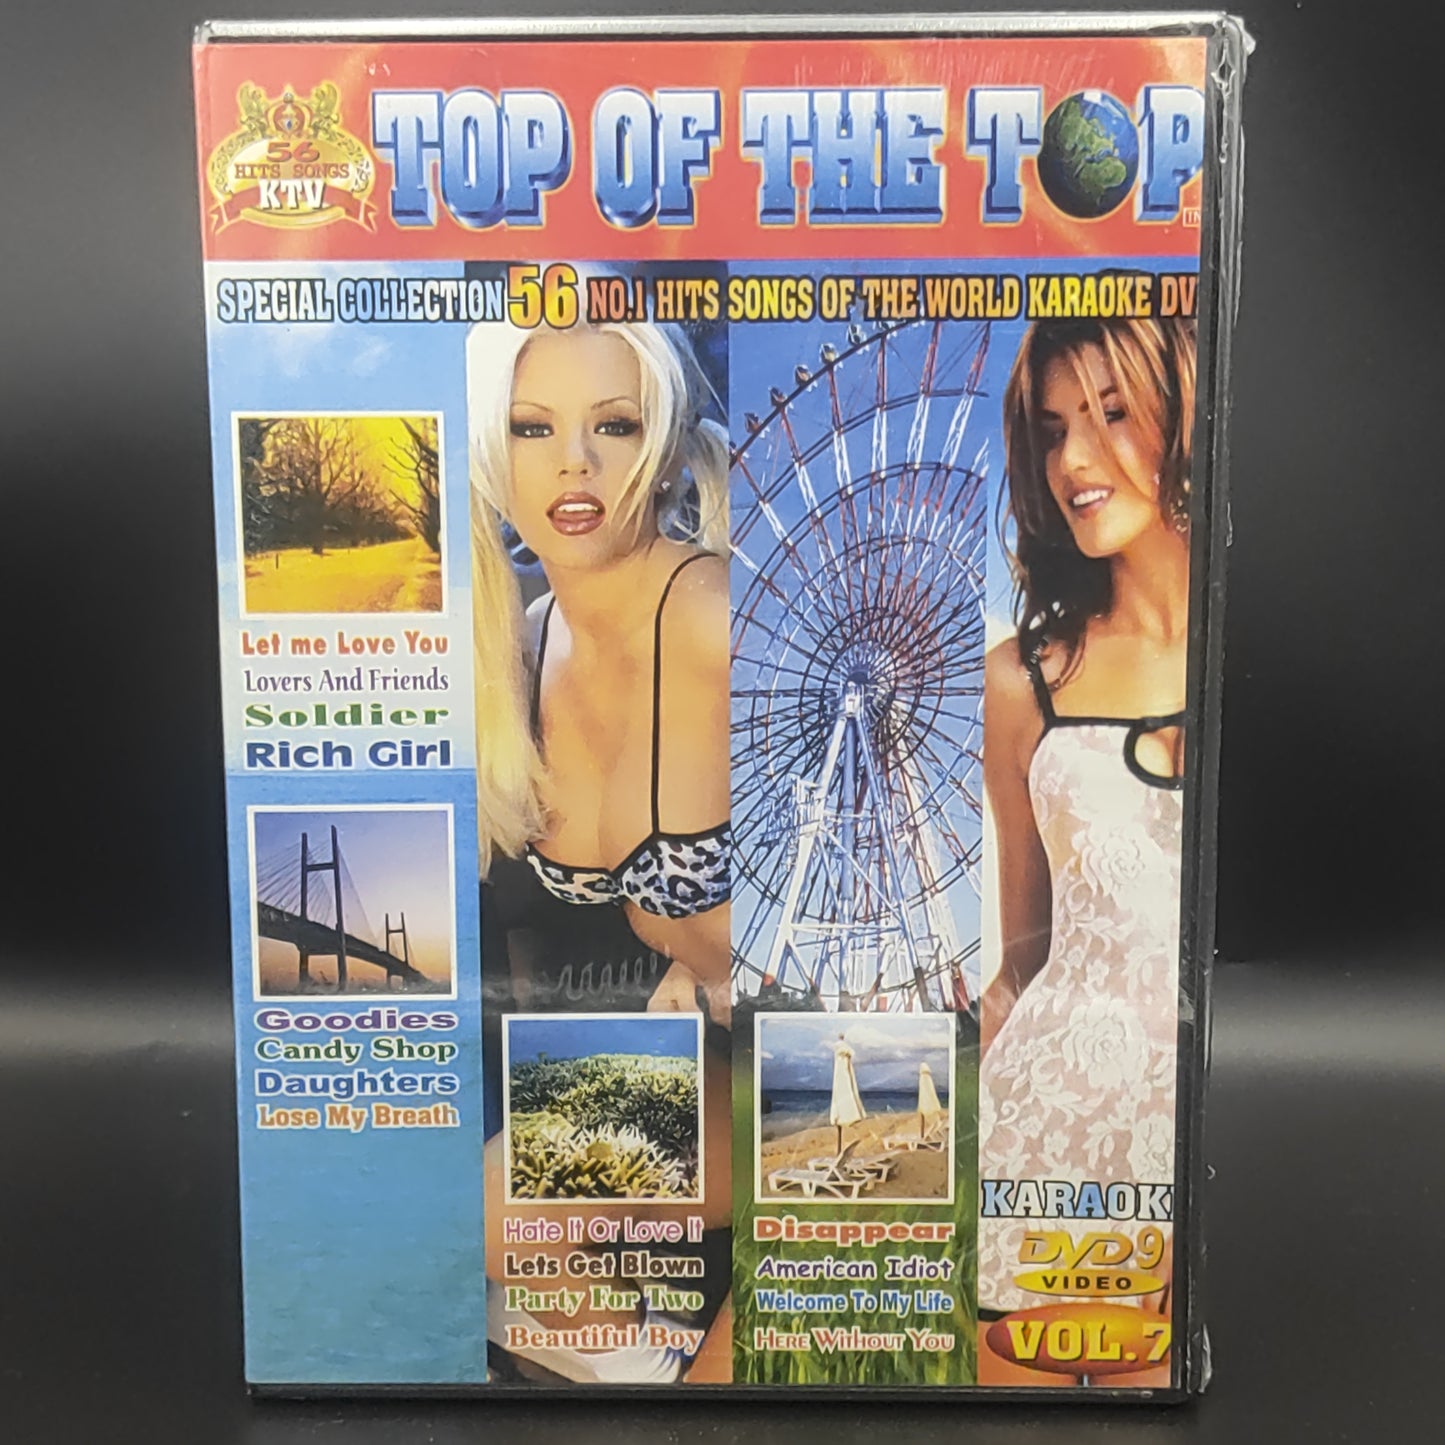 Top of the Pop - Special Collection vol.7